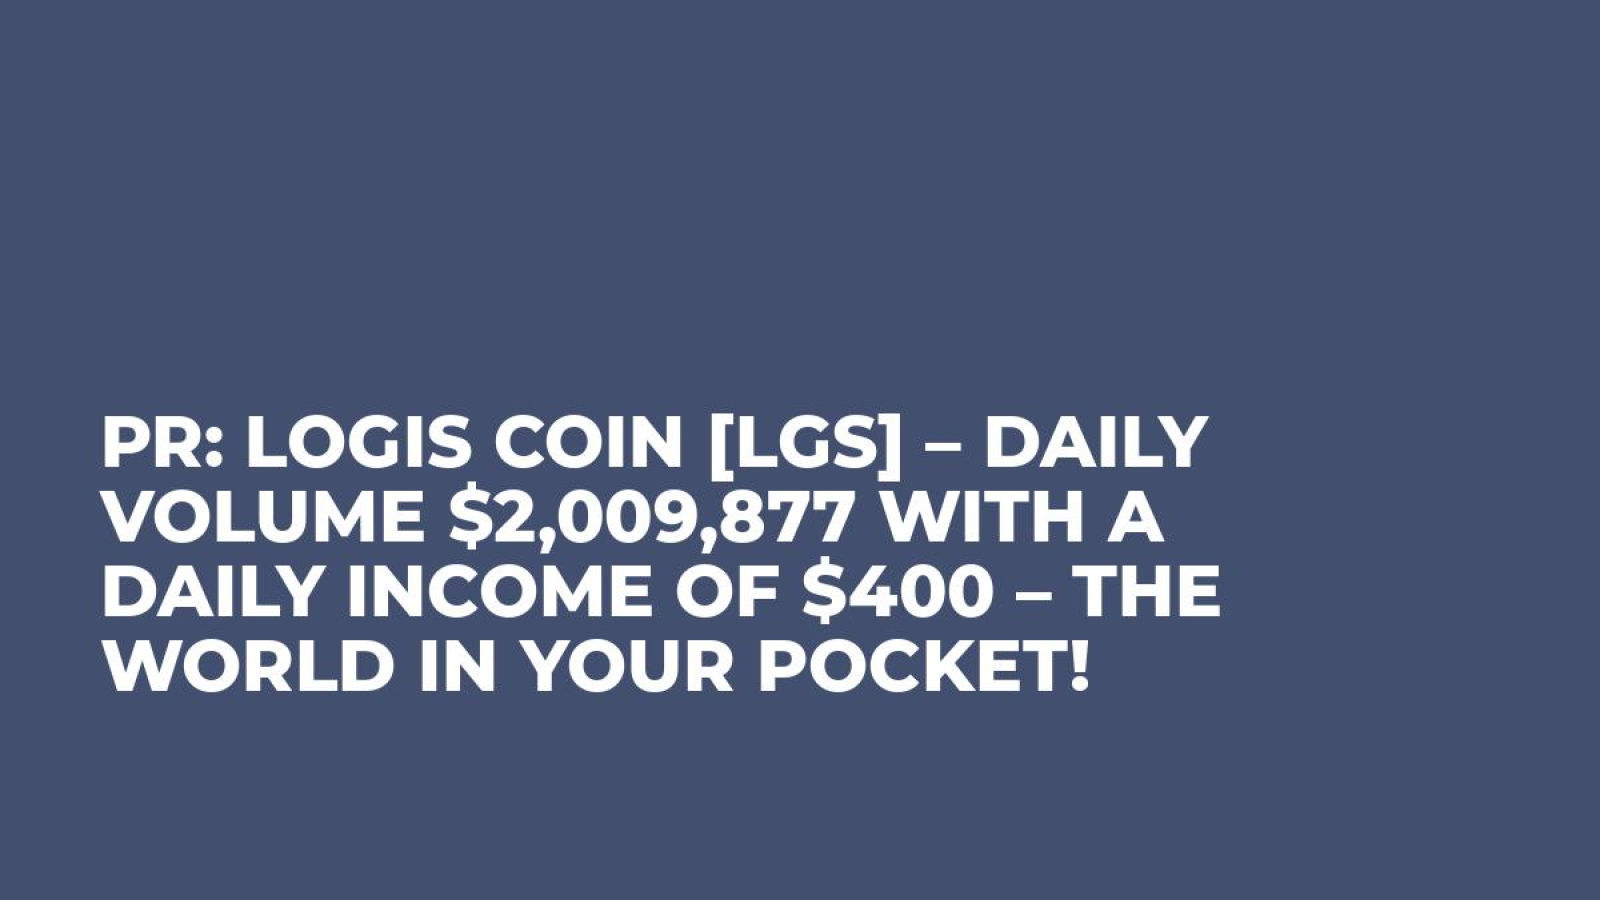 PR: Logis Coin [LGS] – Daily volume $2,009,877 with a daily income of $400 – The World In Your Pocket!